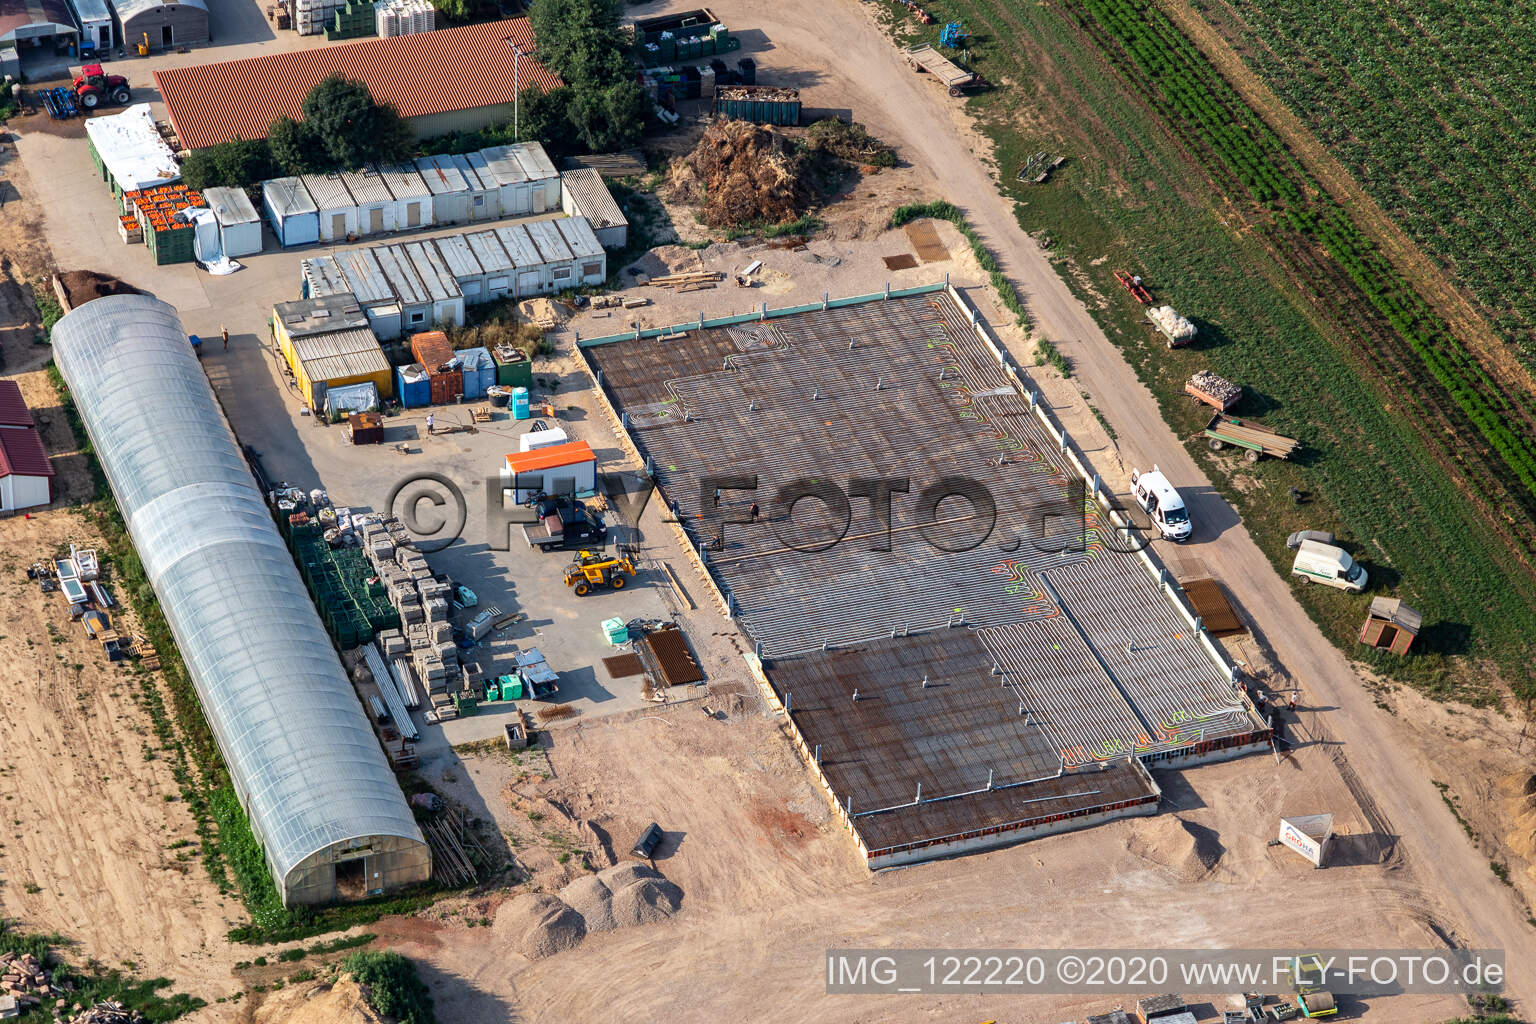 Kugelmann organic vegetables new construction of the production hall in Kandel in the state Rhineland-Palatinate, Germany seen from above